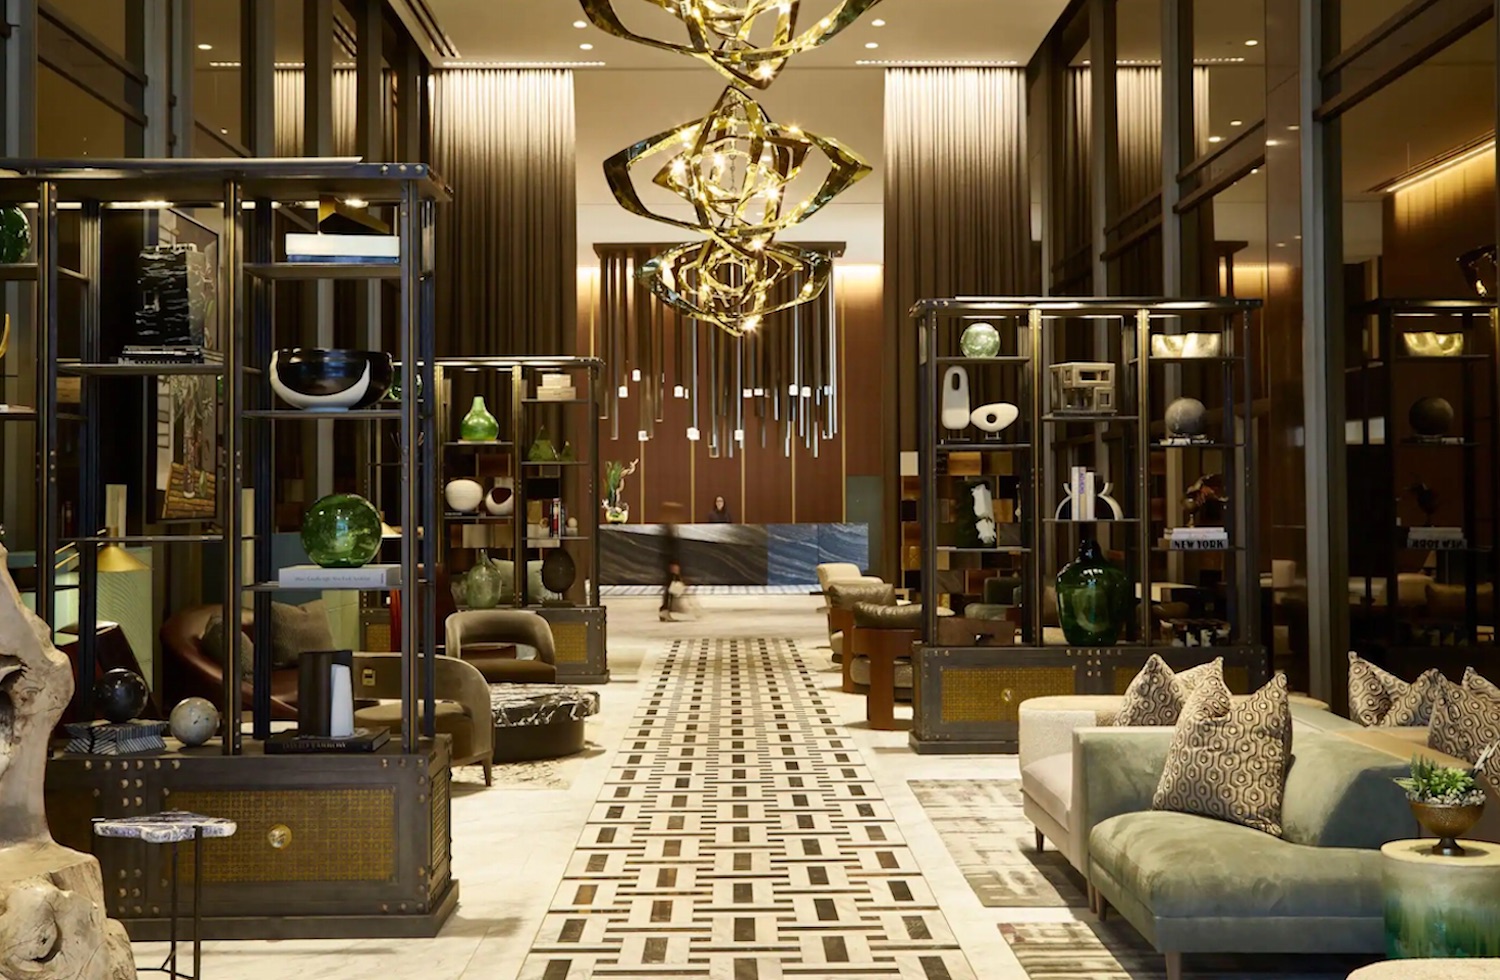 Walkway in Thompson Dallas hotel with gold and brown accents that give a luxury feeling to the space